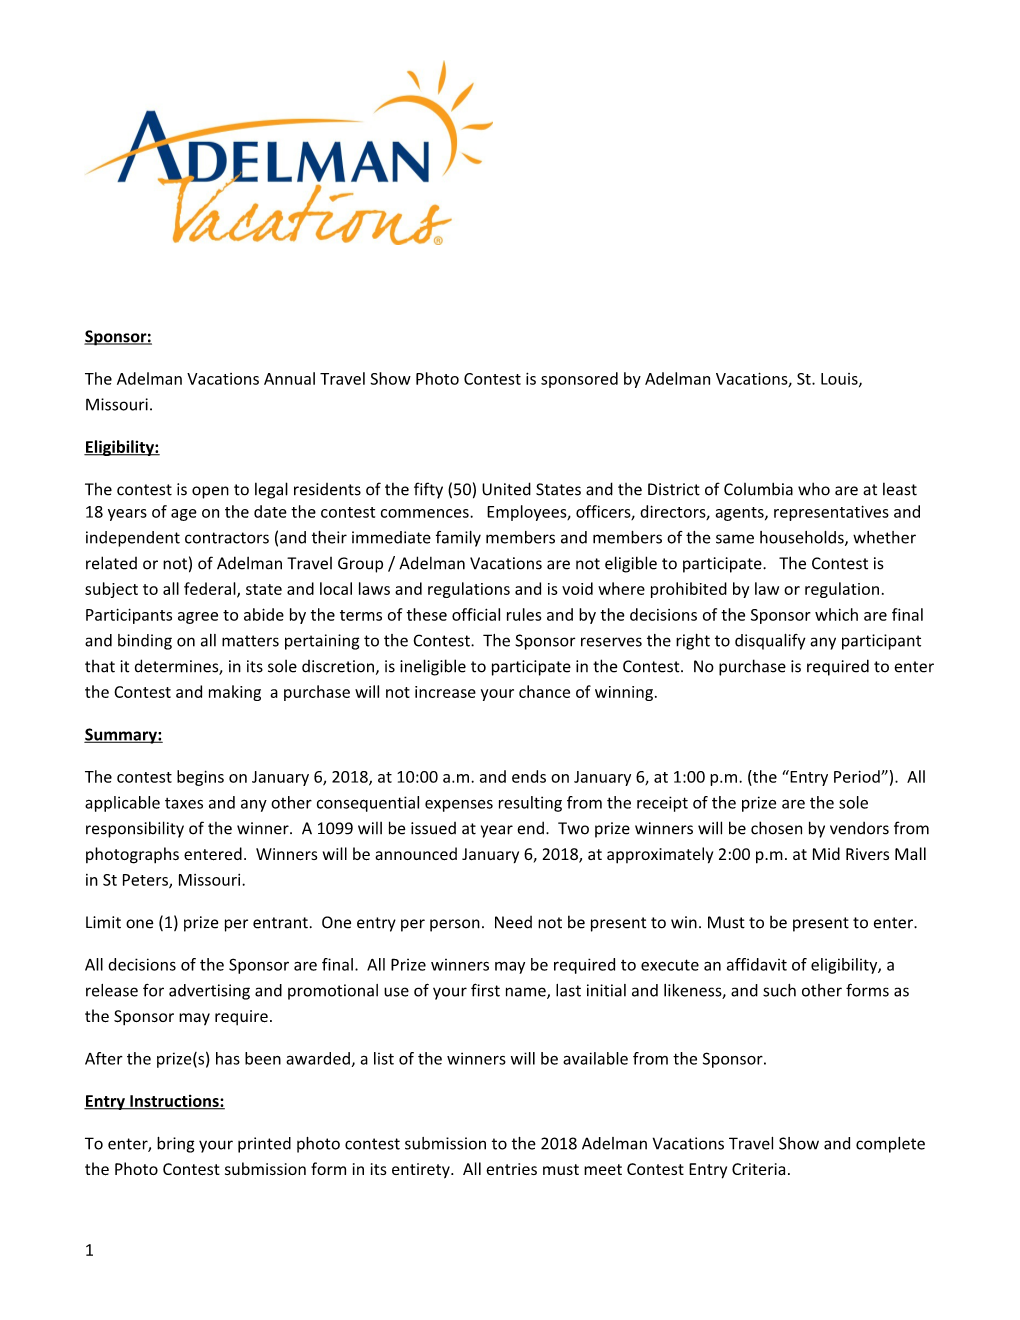 The Adelman Vacations Annual Travel Show Photo Contest Is Sponsored by Adelman Vacations